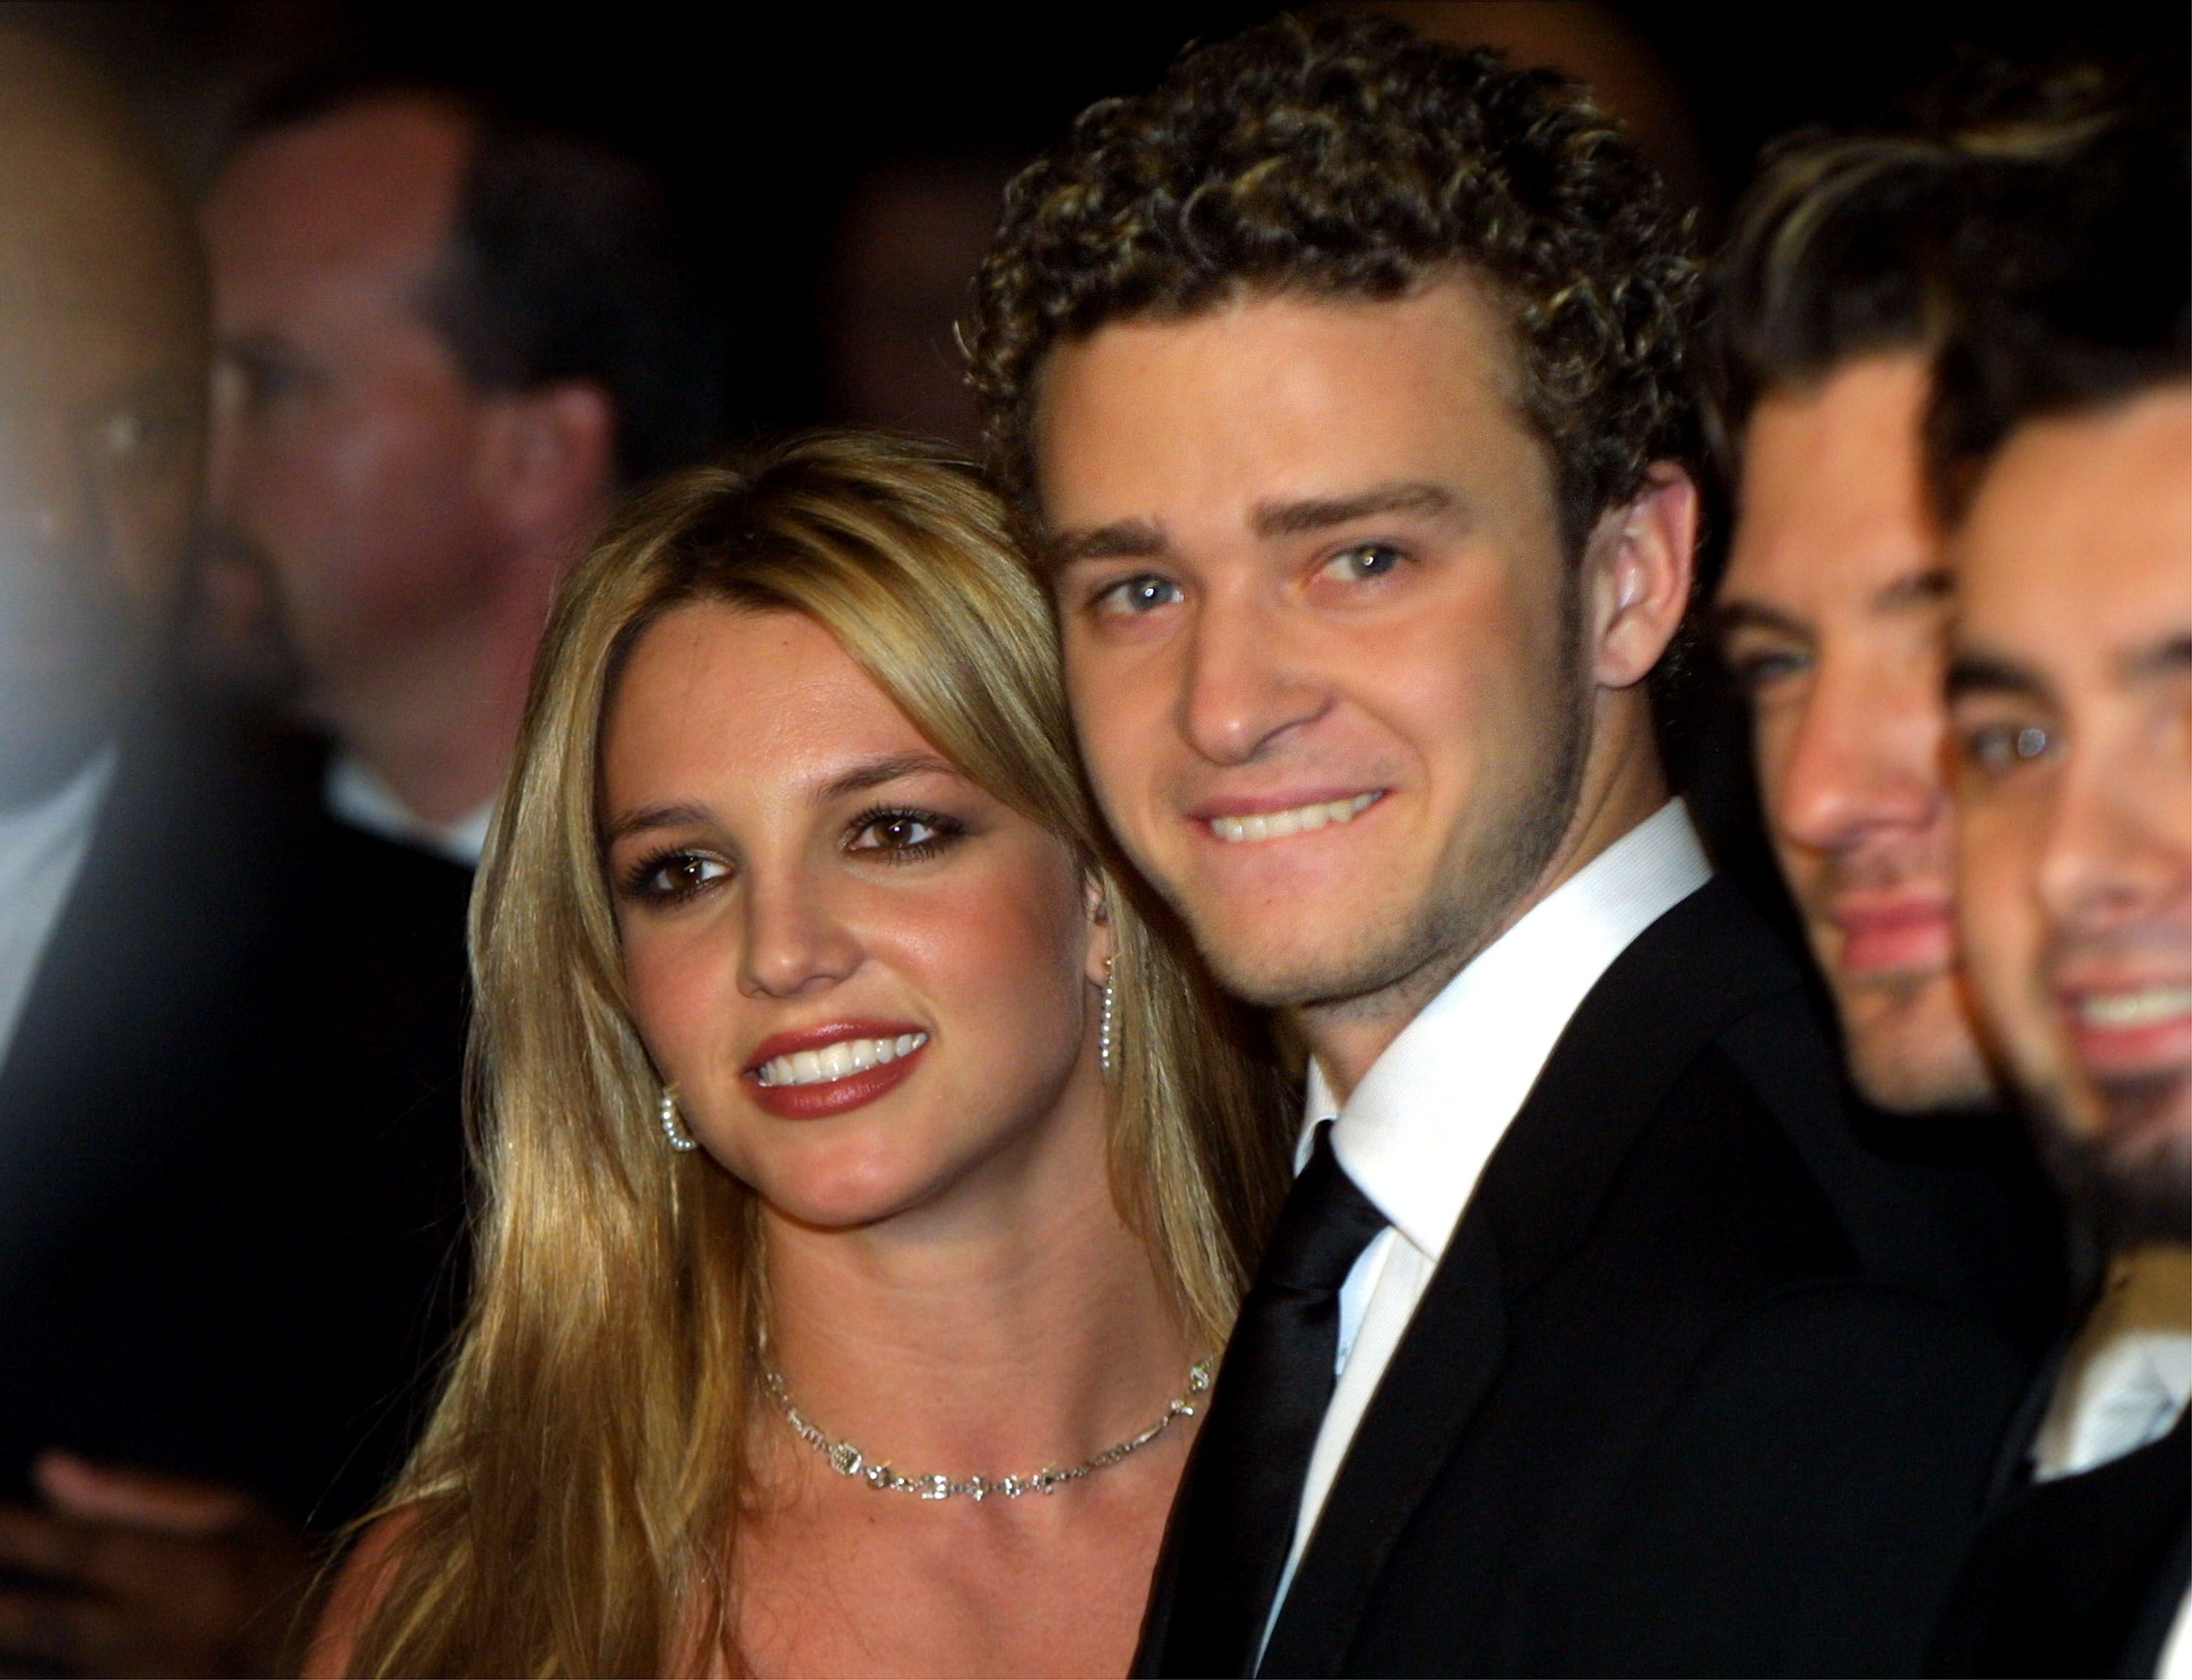 Britney Spears and boyfriend Justin Timberlake from the band N'sync at Clive Davis'' pre-grammy awards gala in 2002 in Beverly Hills | Source: Getty Images